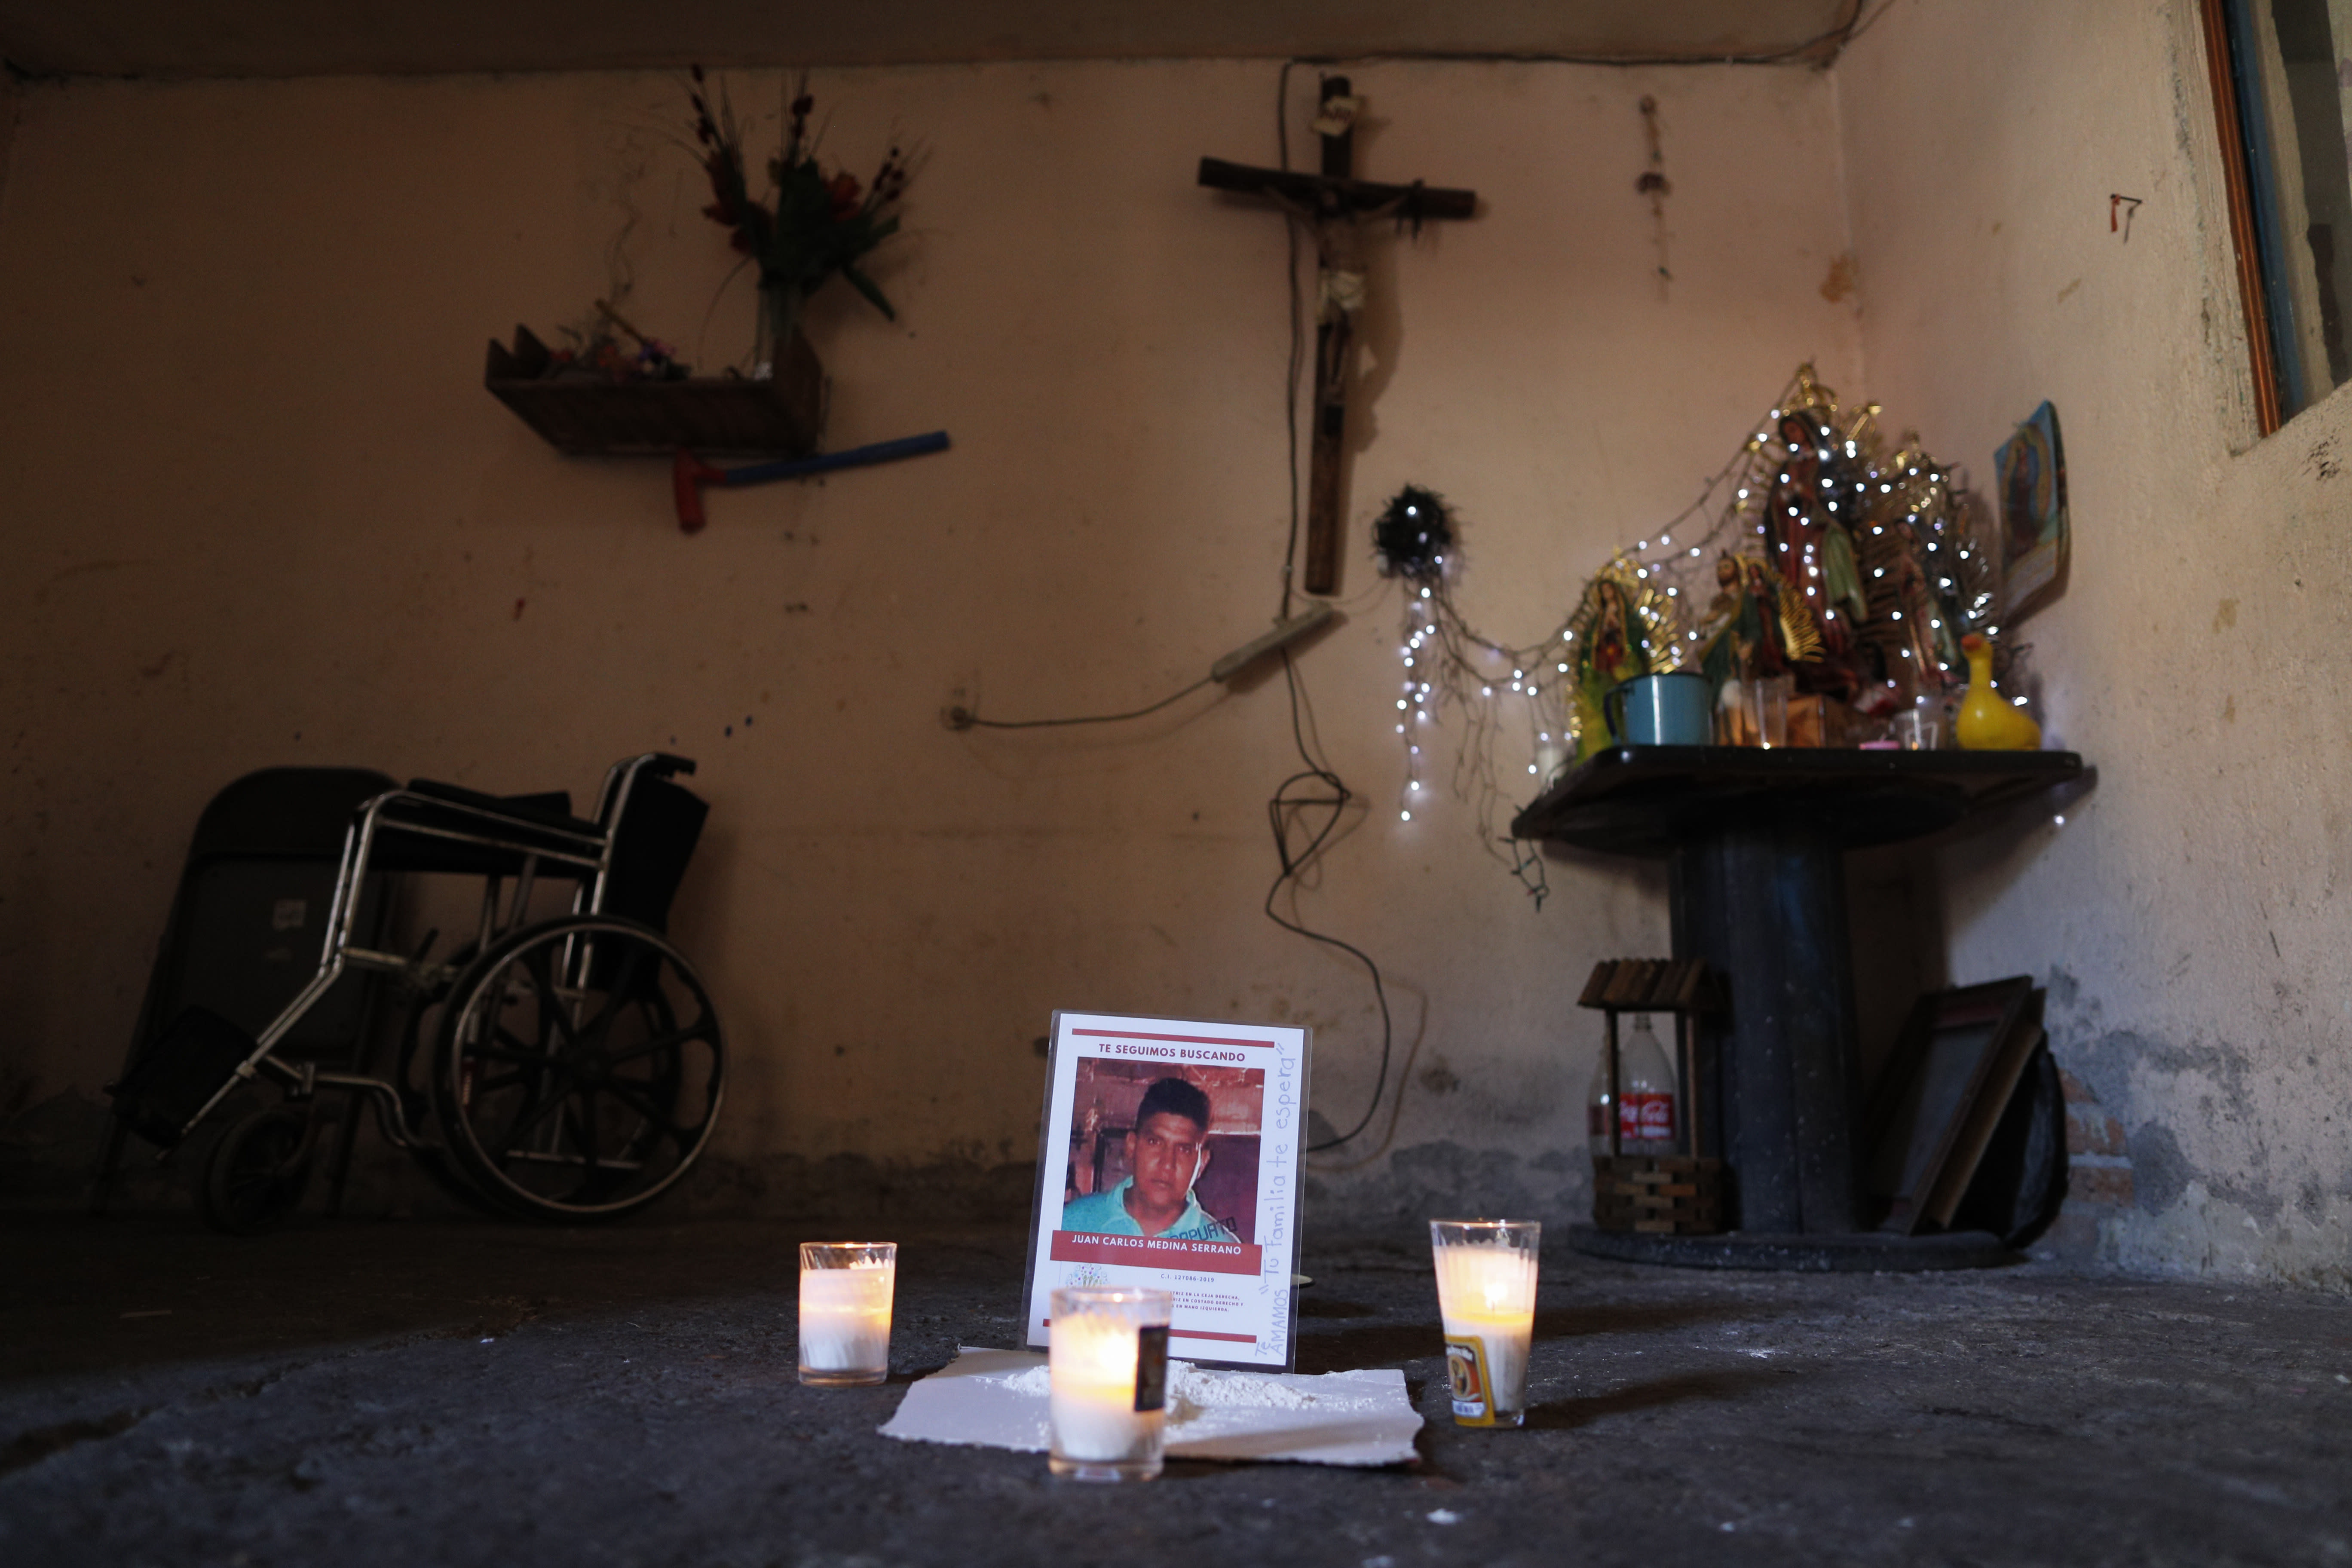 FILE - This Feb. 13, 2020 file photo shows a memorial for Juan Carlos Medina Serrano in his family's living room, the day his remains were buried, in Irapuato, Guanajuato state, Mexico. Armed men took the 32-year-old from his house on Dec. 3, 2019, and a few days later, authorities found 19 rotting bodies buried in a backyard in a nearby town, but it took two months for them to notify his wife that her husband was one of the bodies. The two most powerful drug cartels in the hemisphere are battling over this industrial and farming hub of central Mexico — a state that has attracted gangs for the same reason it has lured auto manufacturers: road and rail networks that lead straight to the U.S. border. (AP Photo/Rebecca Blackwell, File)